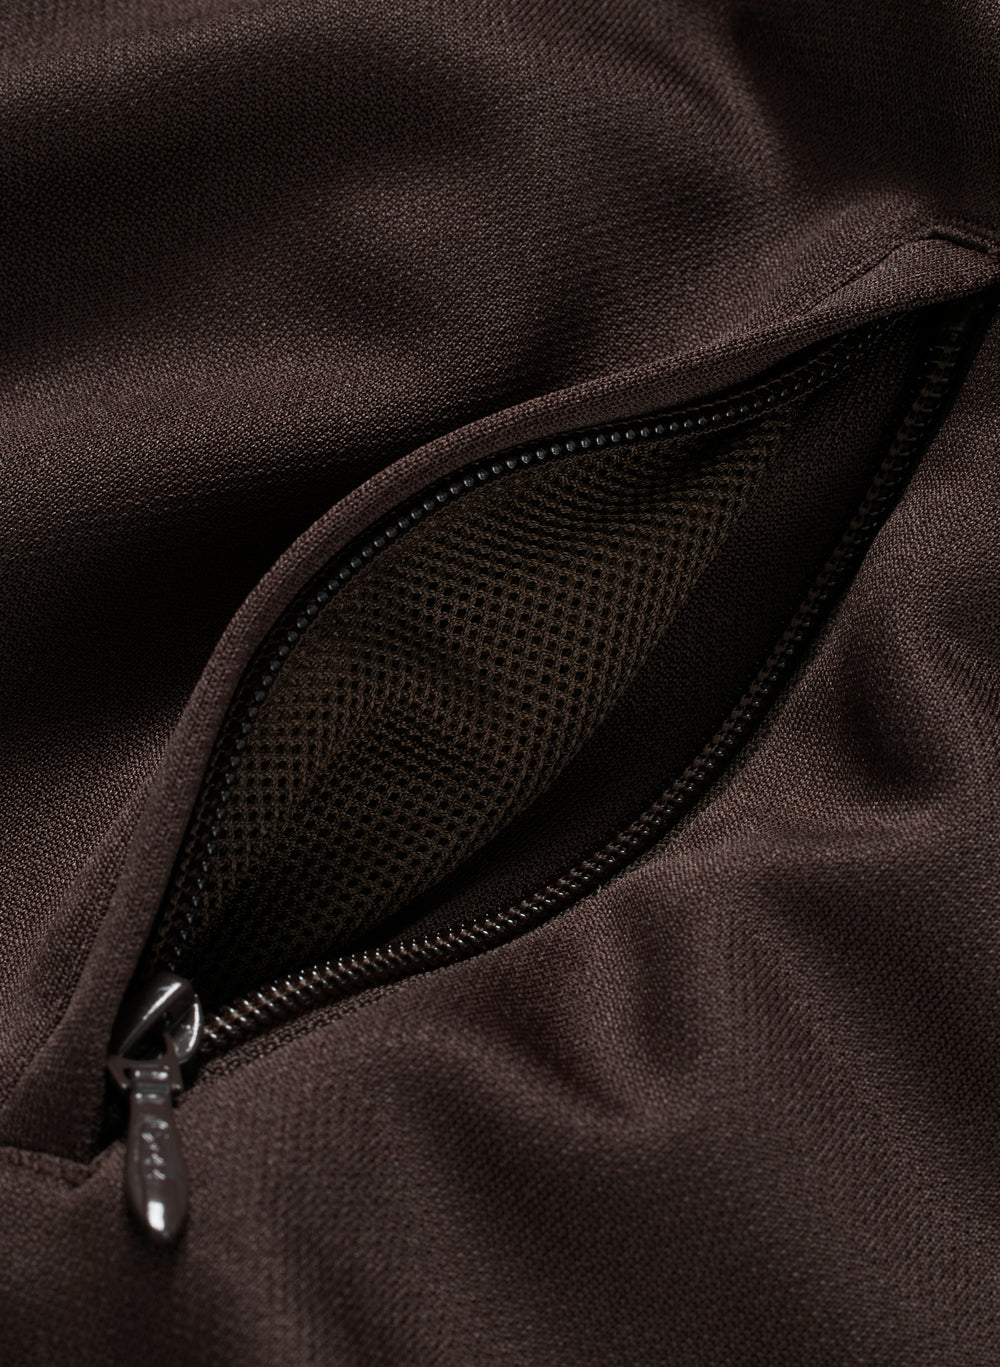 Fan Tracksuit Top - Brown Tricot